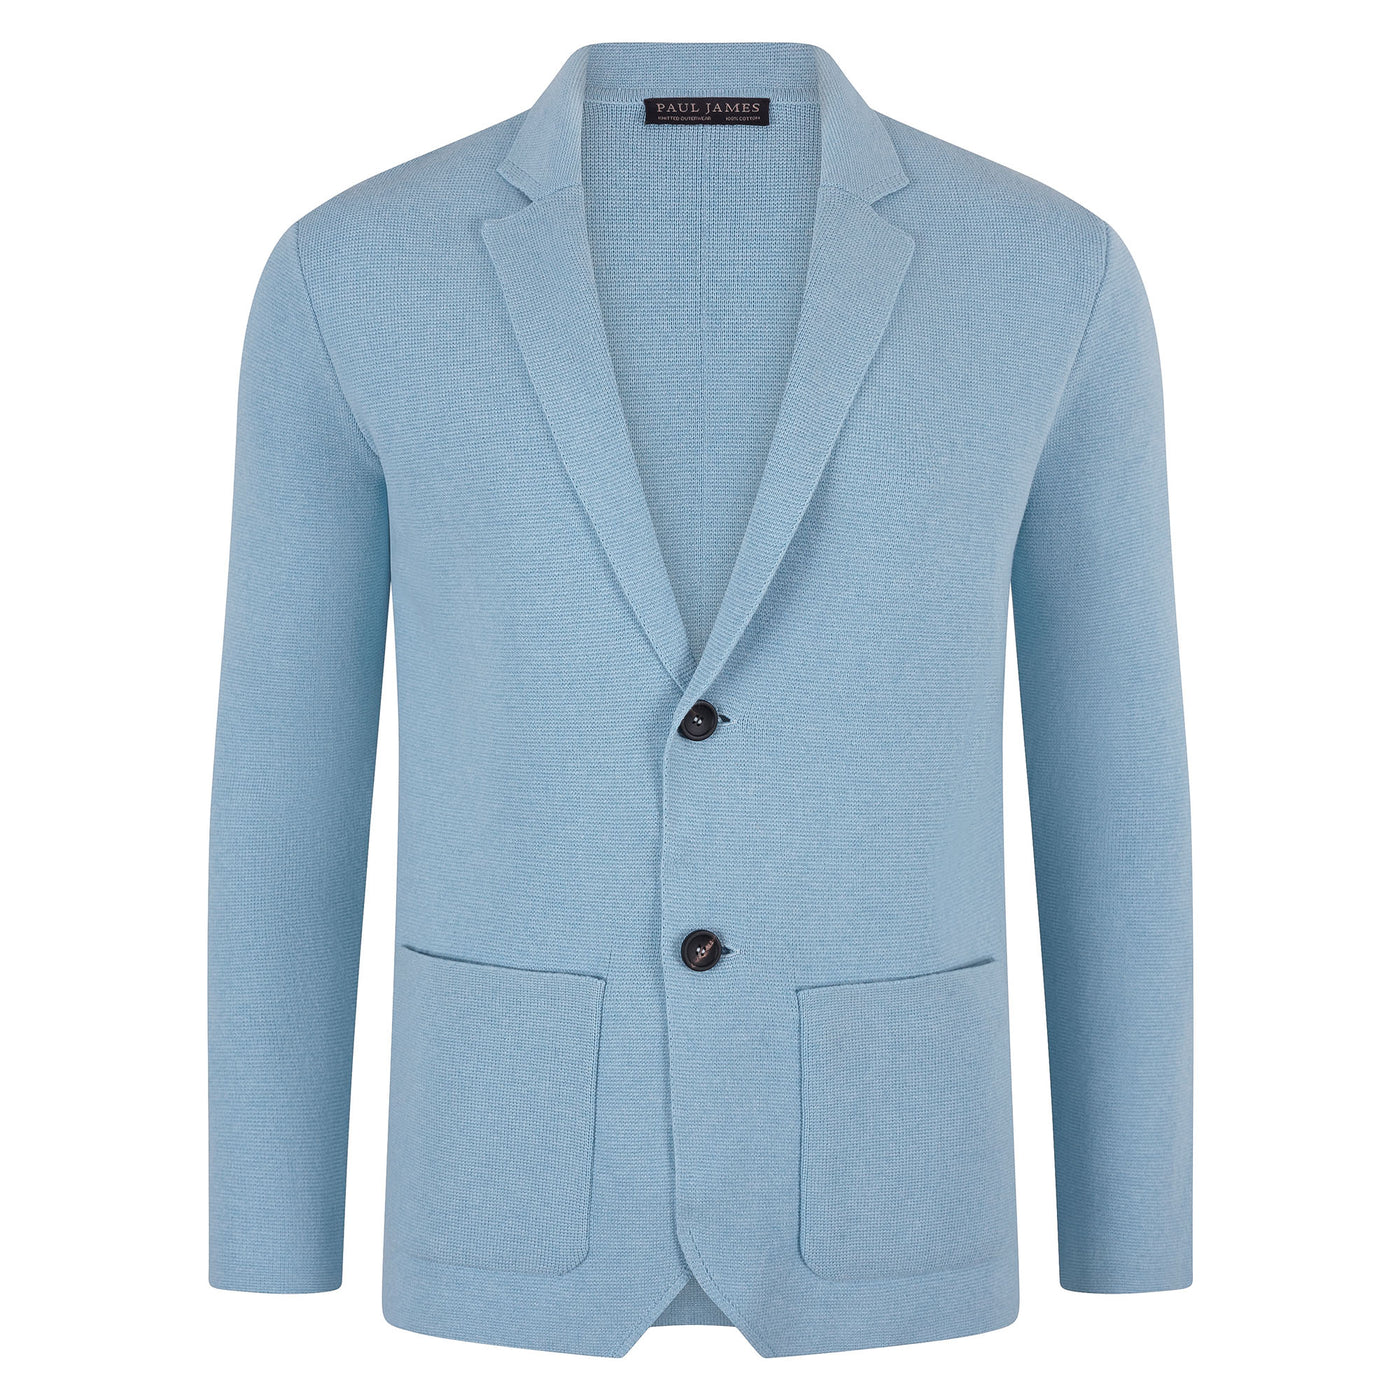 Pale blue mens knitted blazer